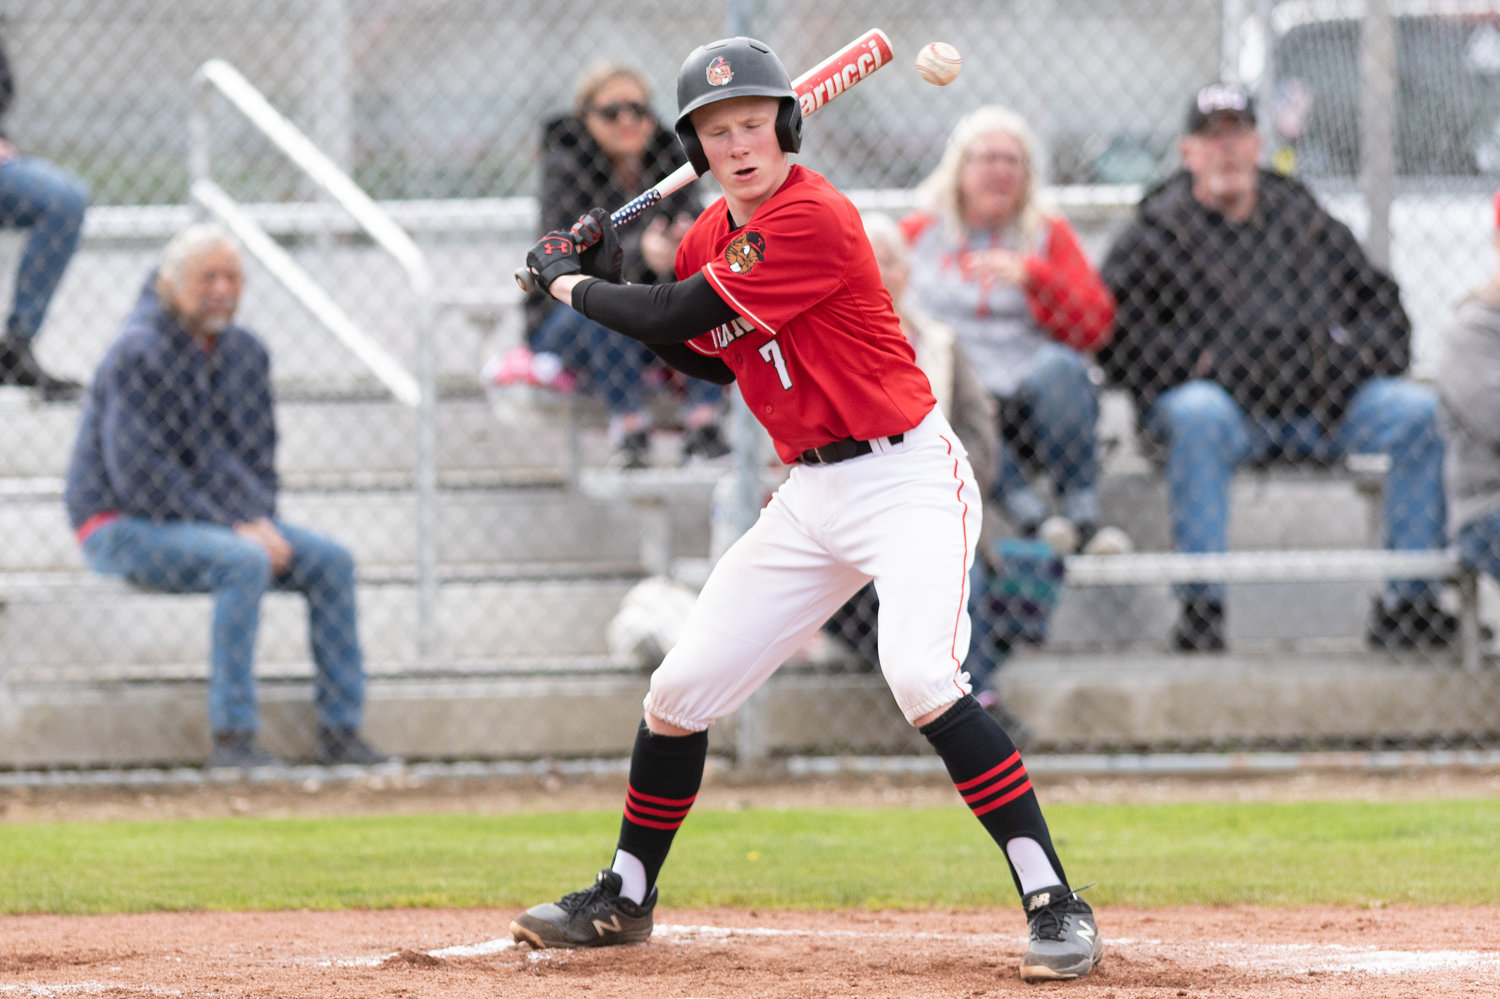 Tenino's Austin Gonia takes a pitch against Montesano May 3.